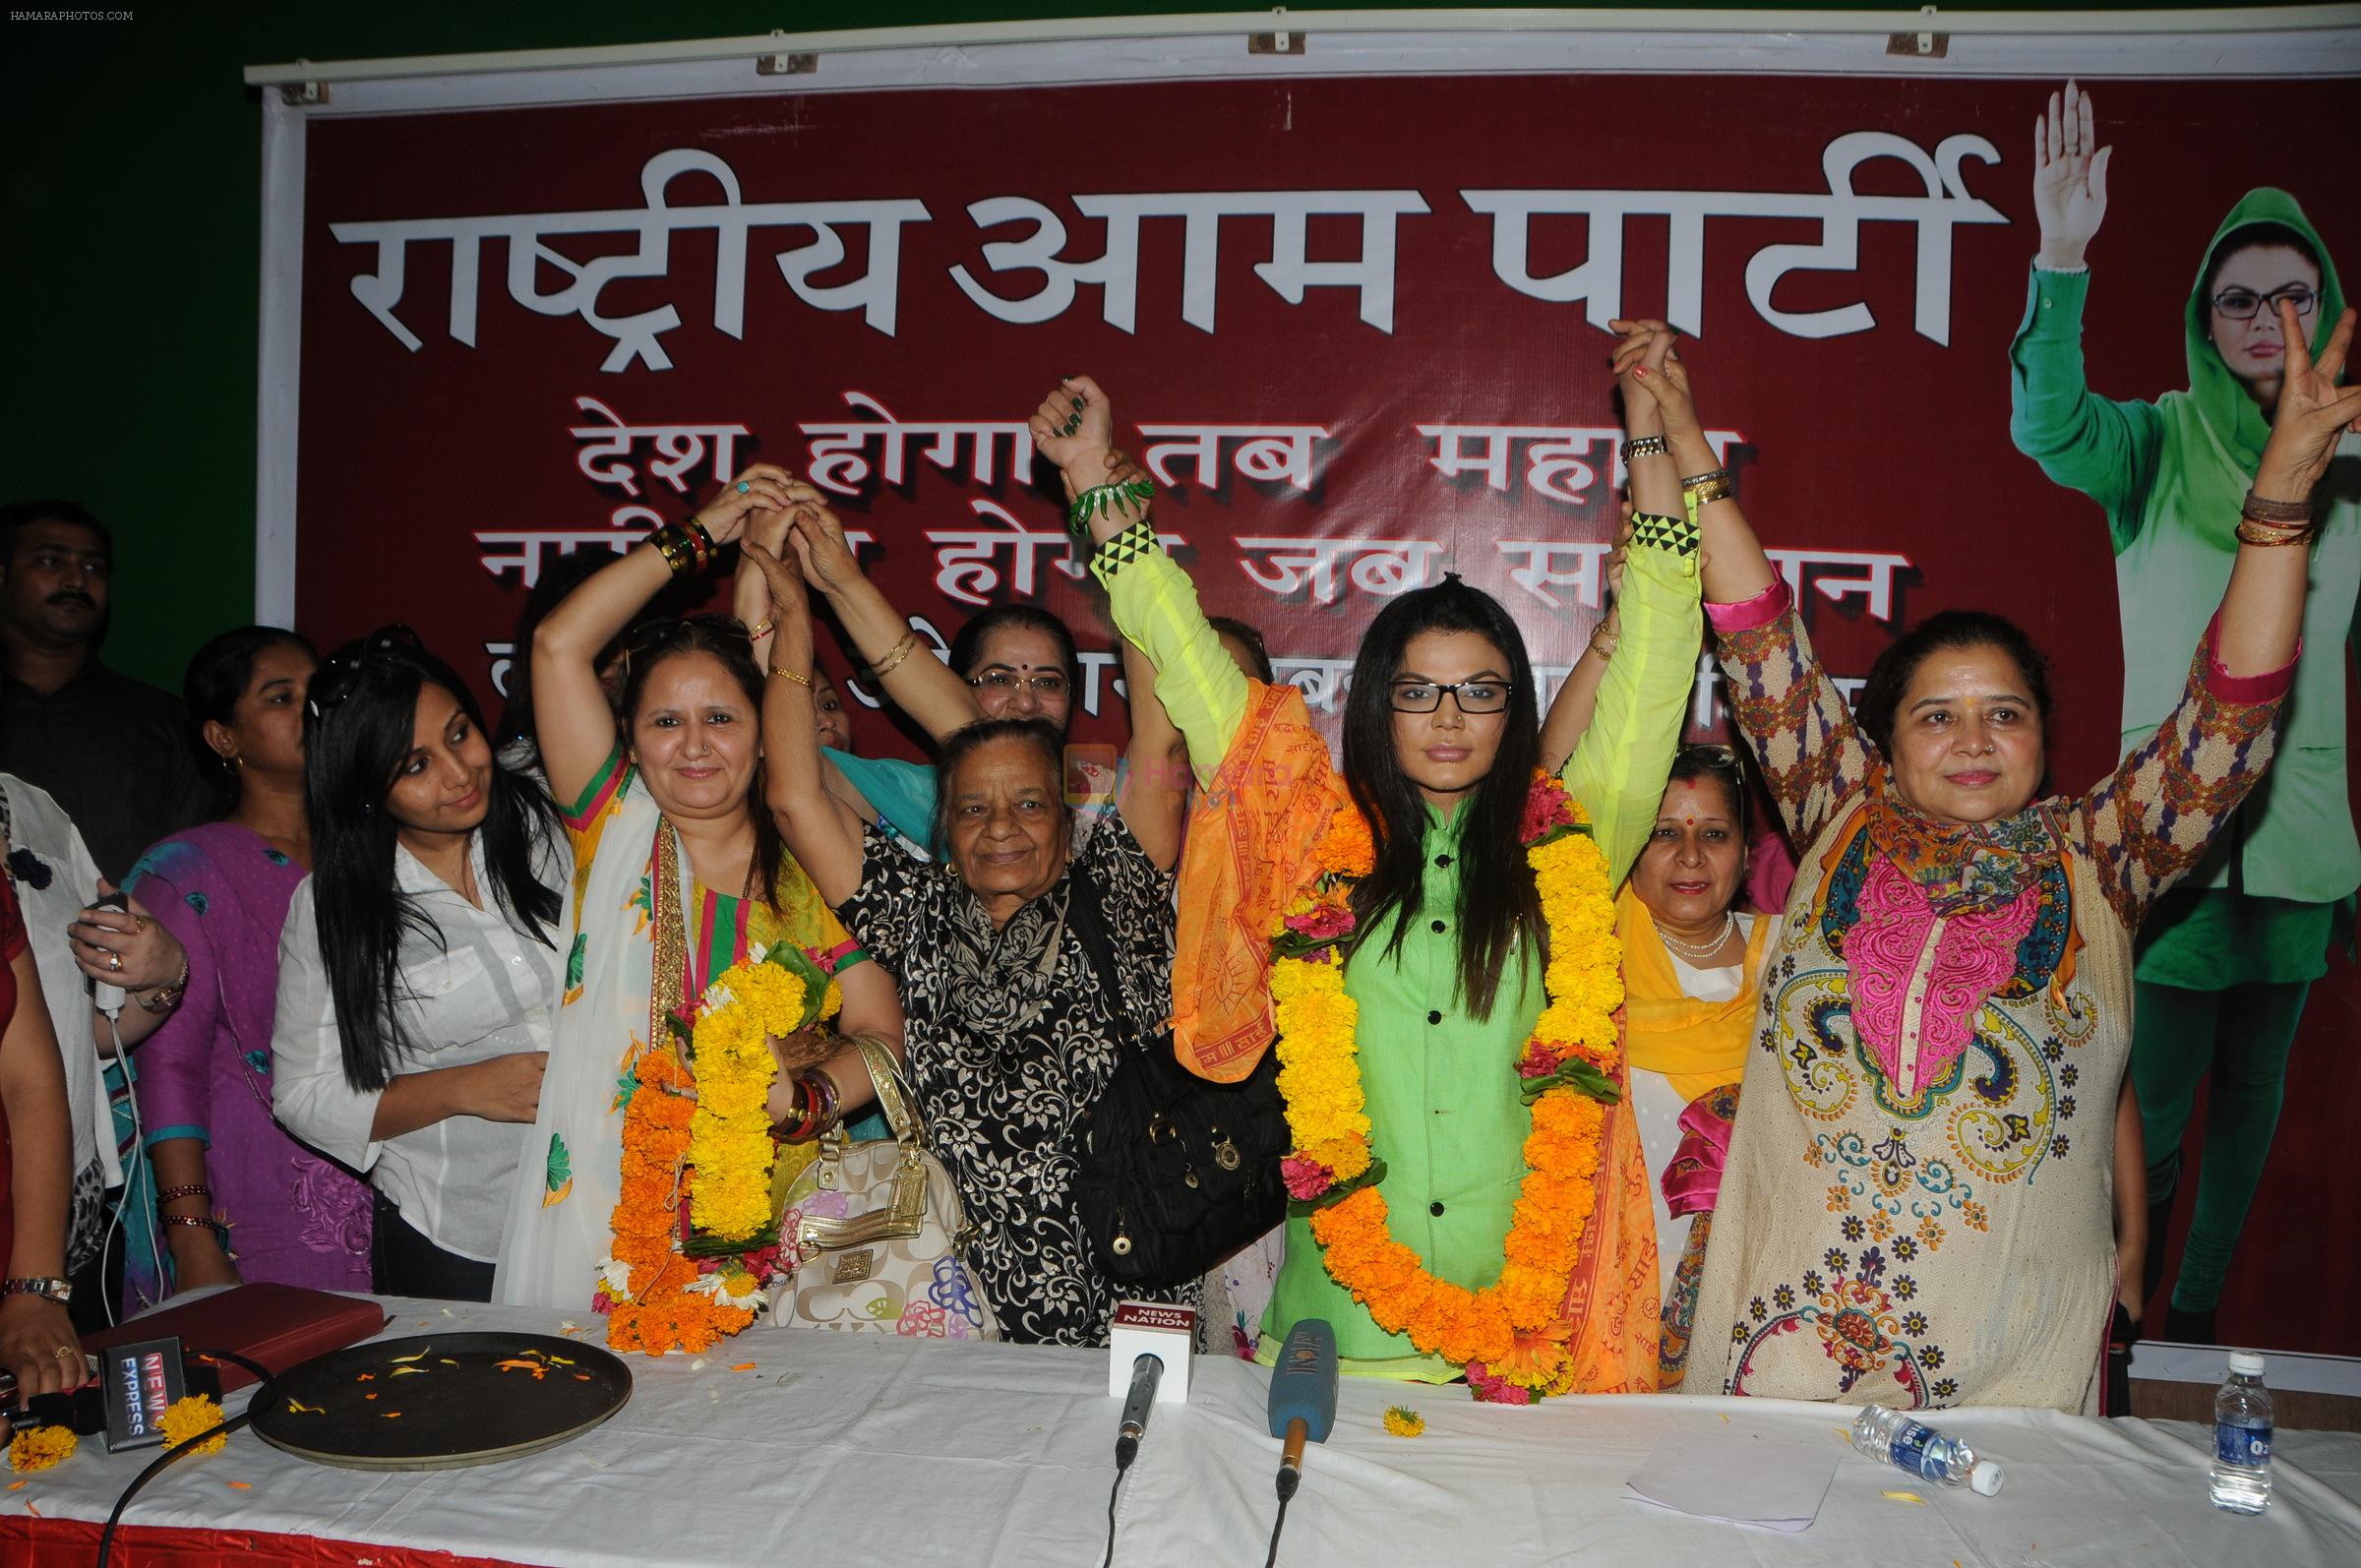 Rakhi Sawant will be contesting the Lok Sabha election battling for the position through Rashtriya Aam Party from the Mumbai North-West constituency on 28th March 2014